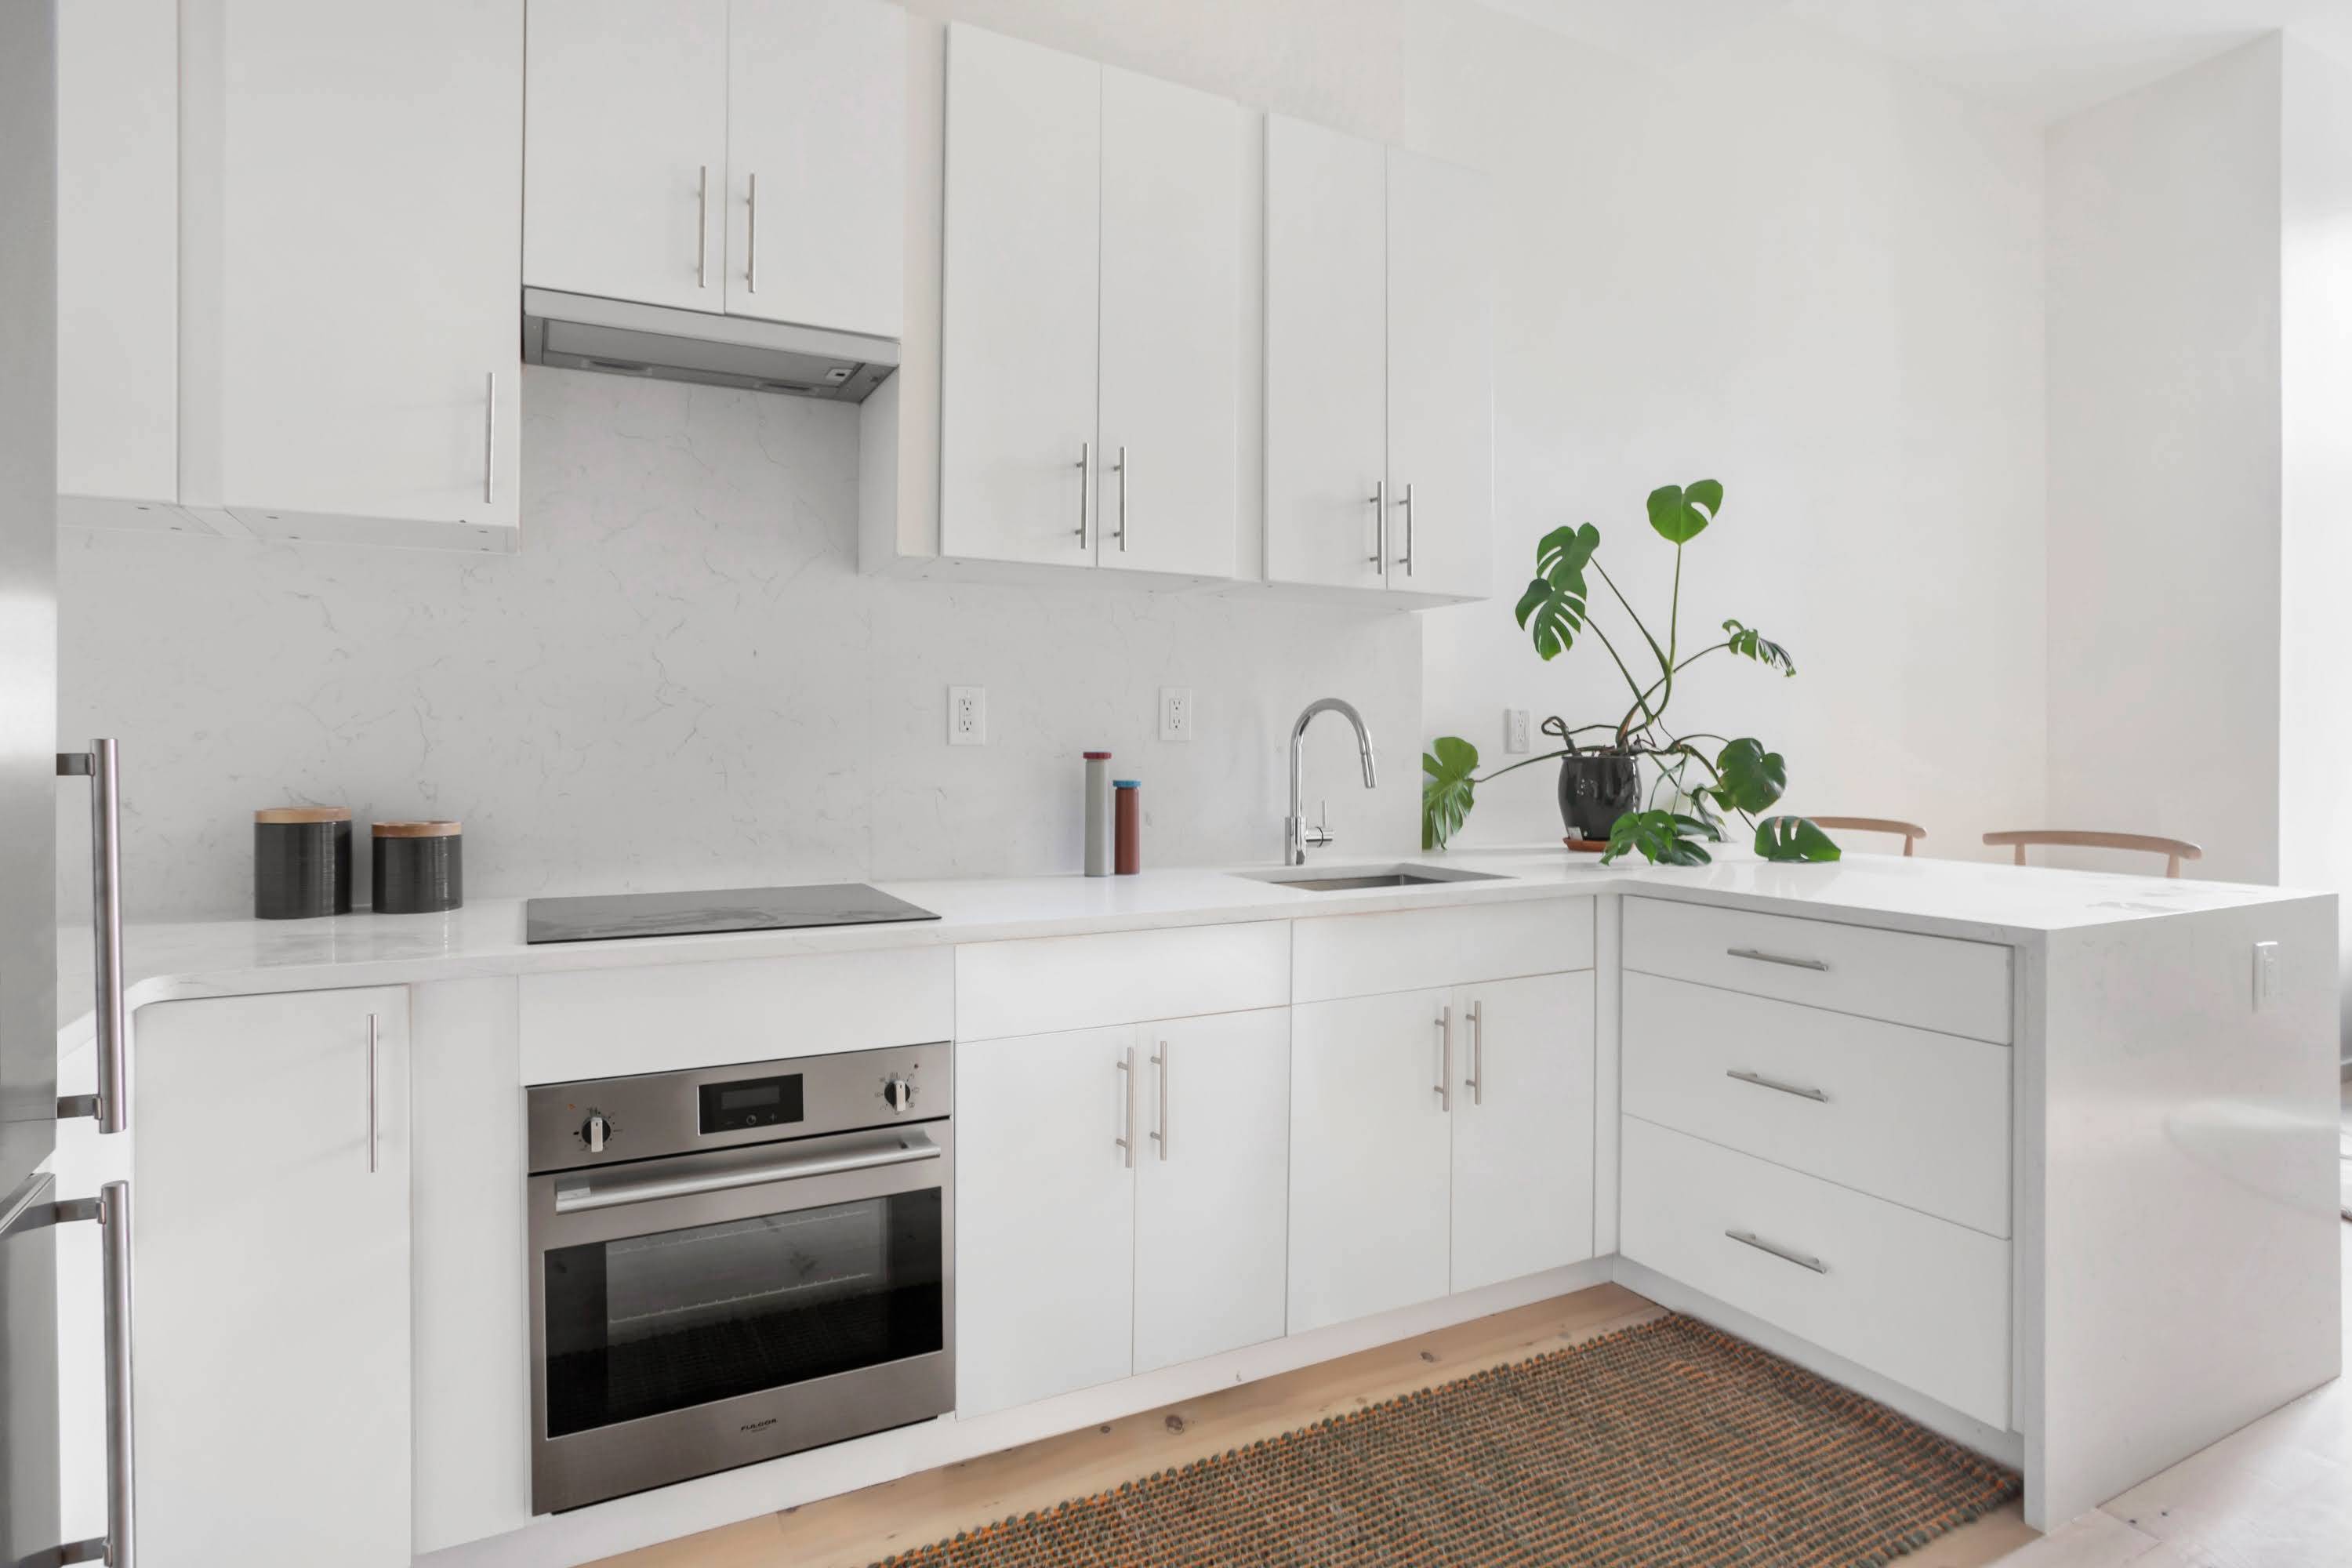 Be the first to live in this stunning two bedroom, one bath apartment at the brand new Carriage House Lofts located at 457 West 150th Street between Amsterdam and Convent ...